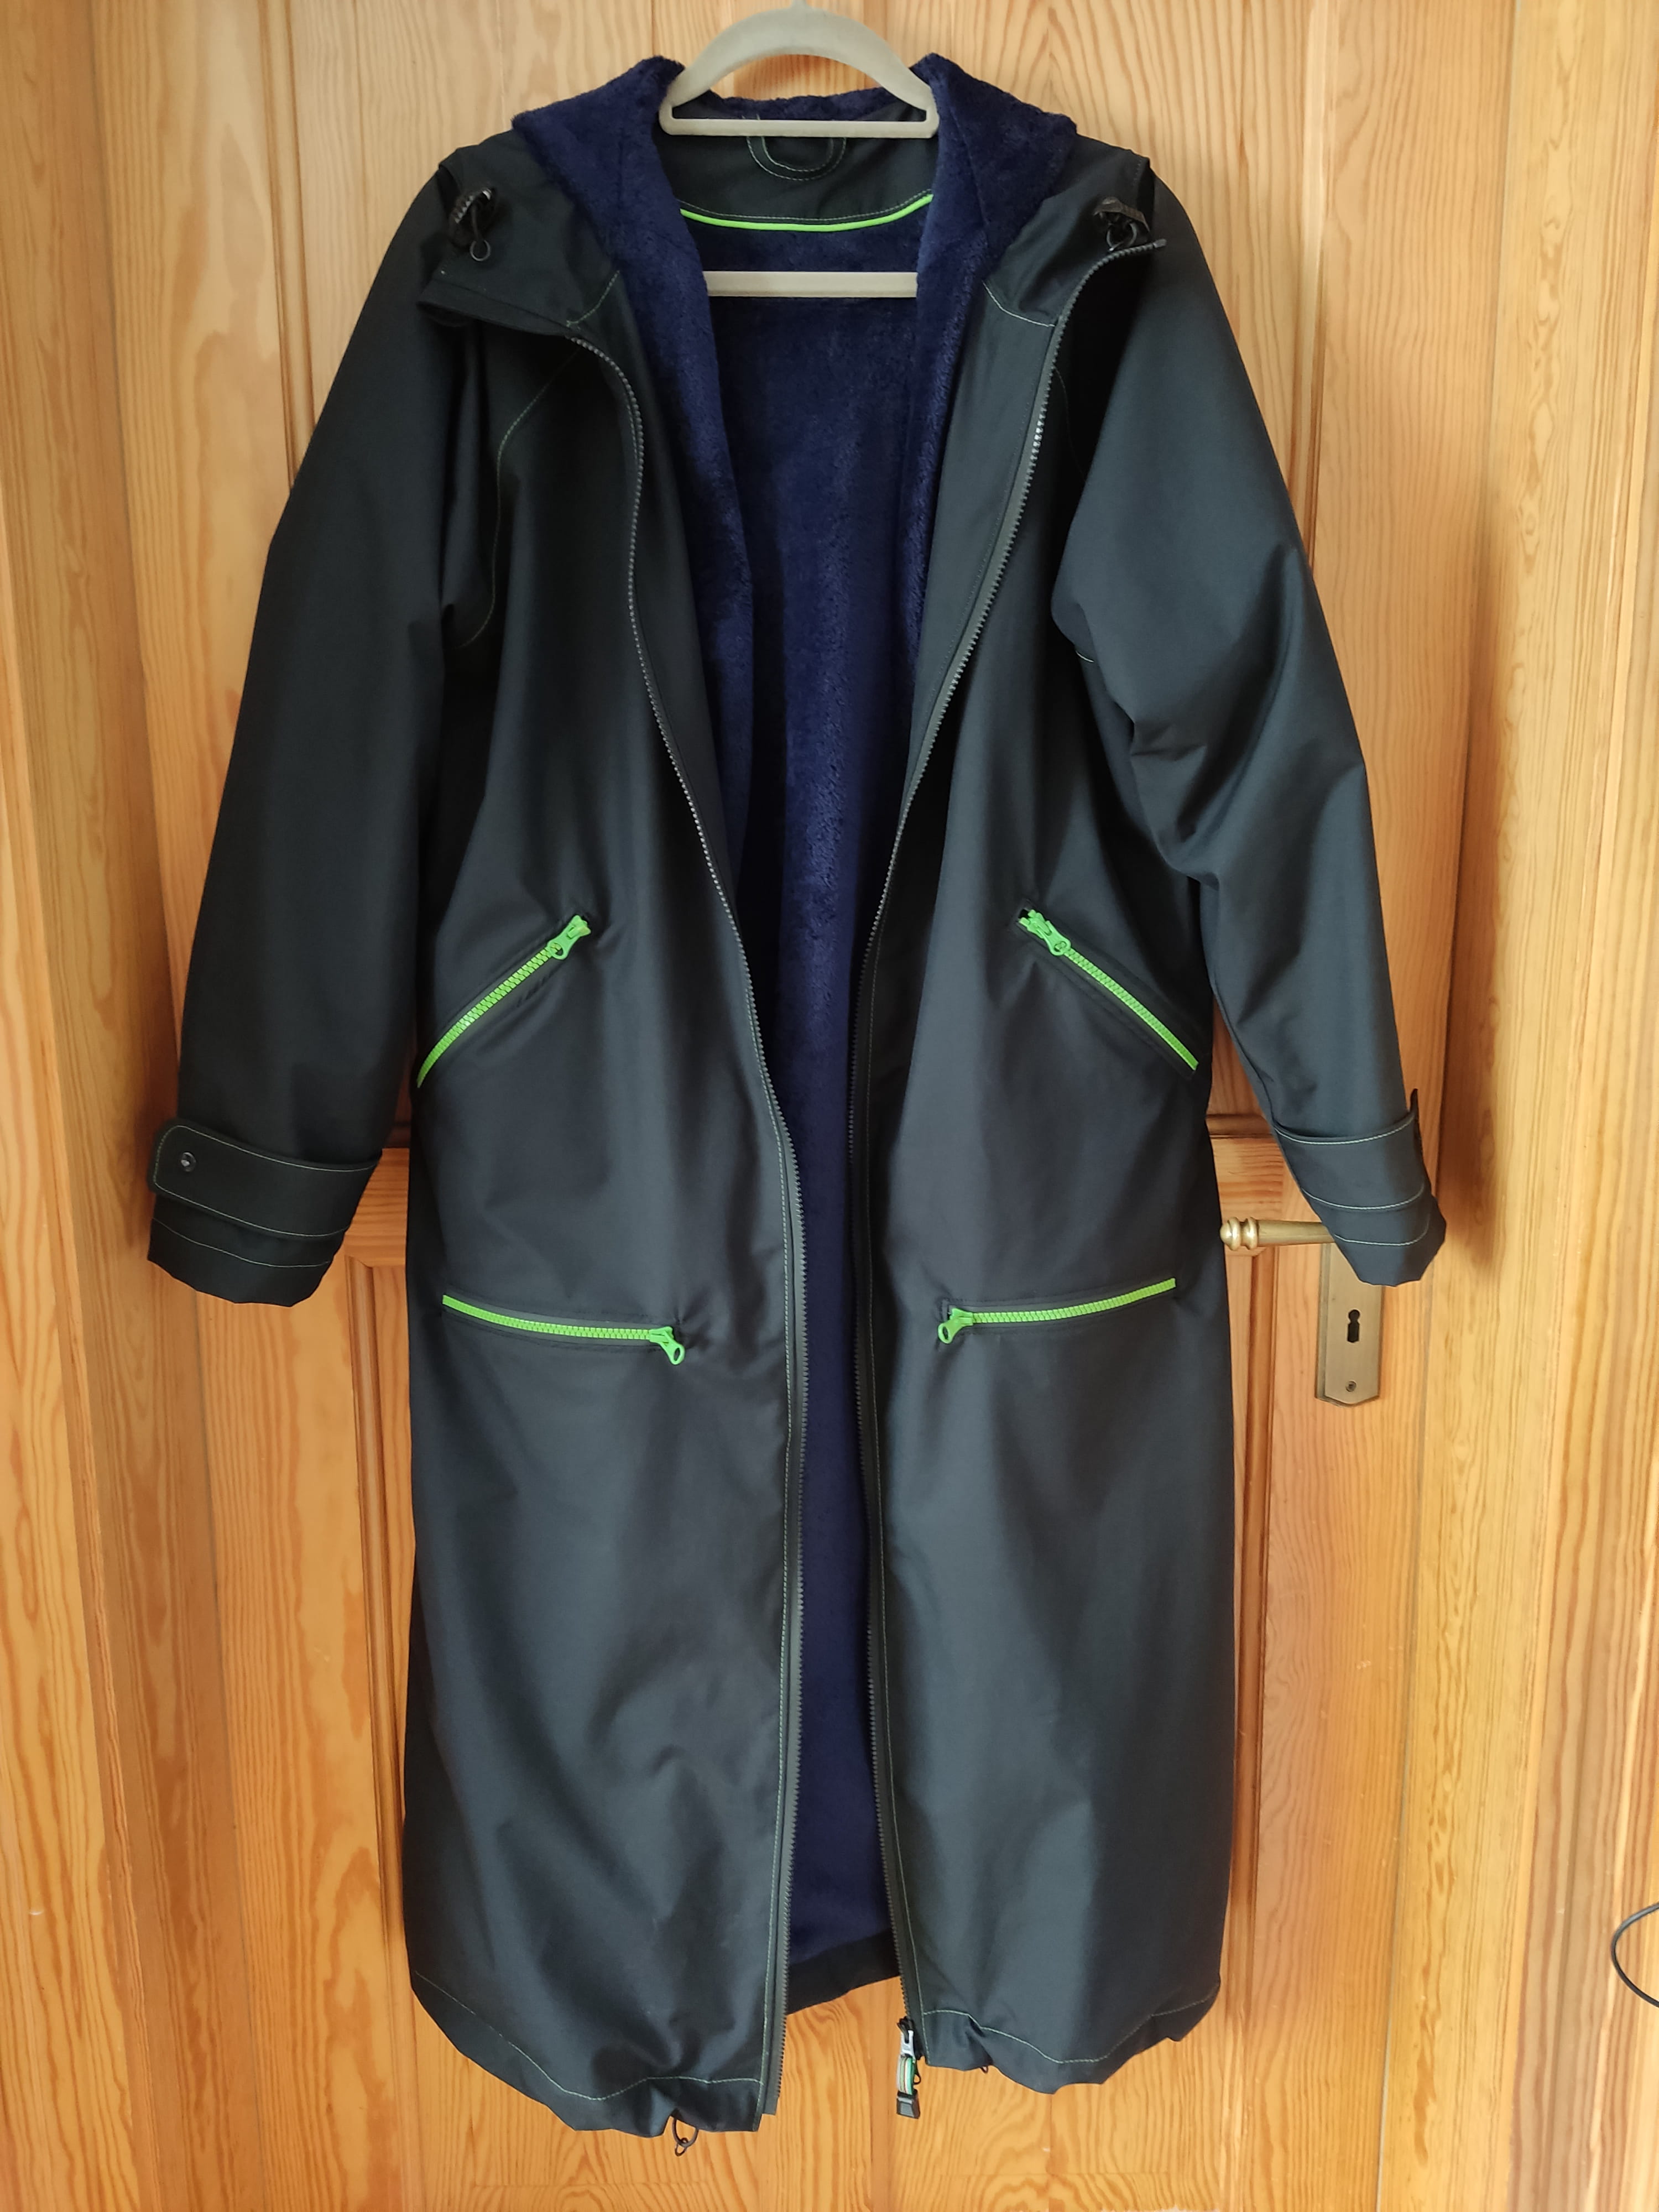 Coat made of a 3-layer laminate and a high-loft fleece